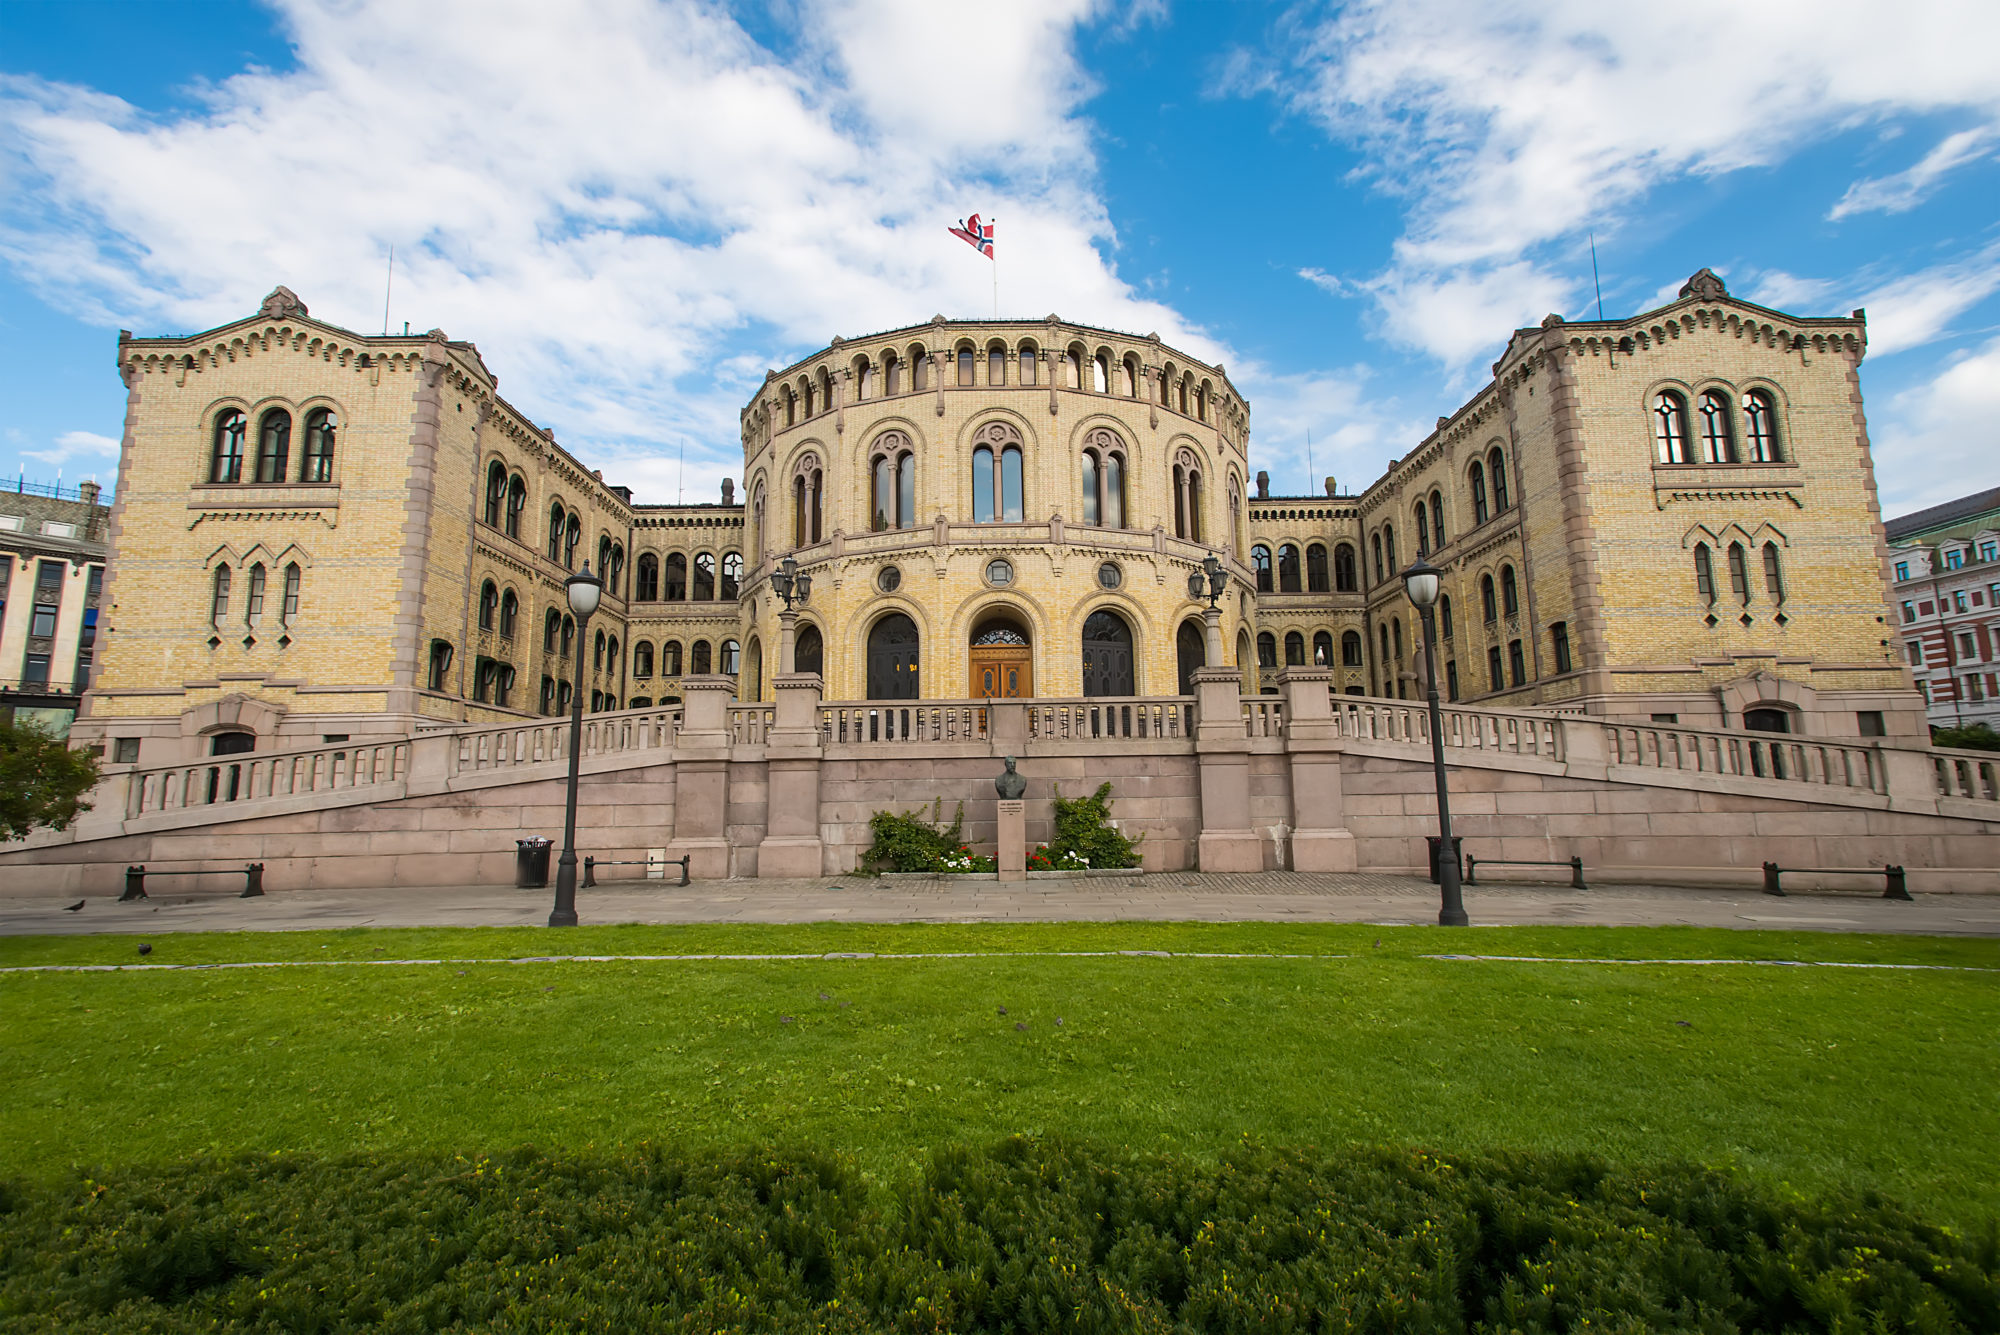 The Storting is the supreme legislature of Norway